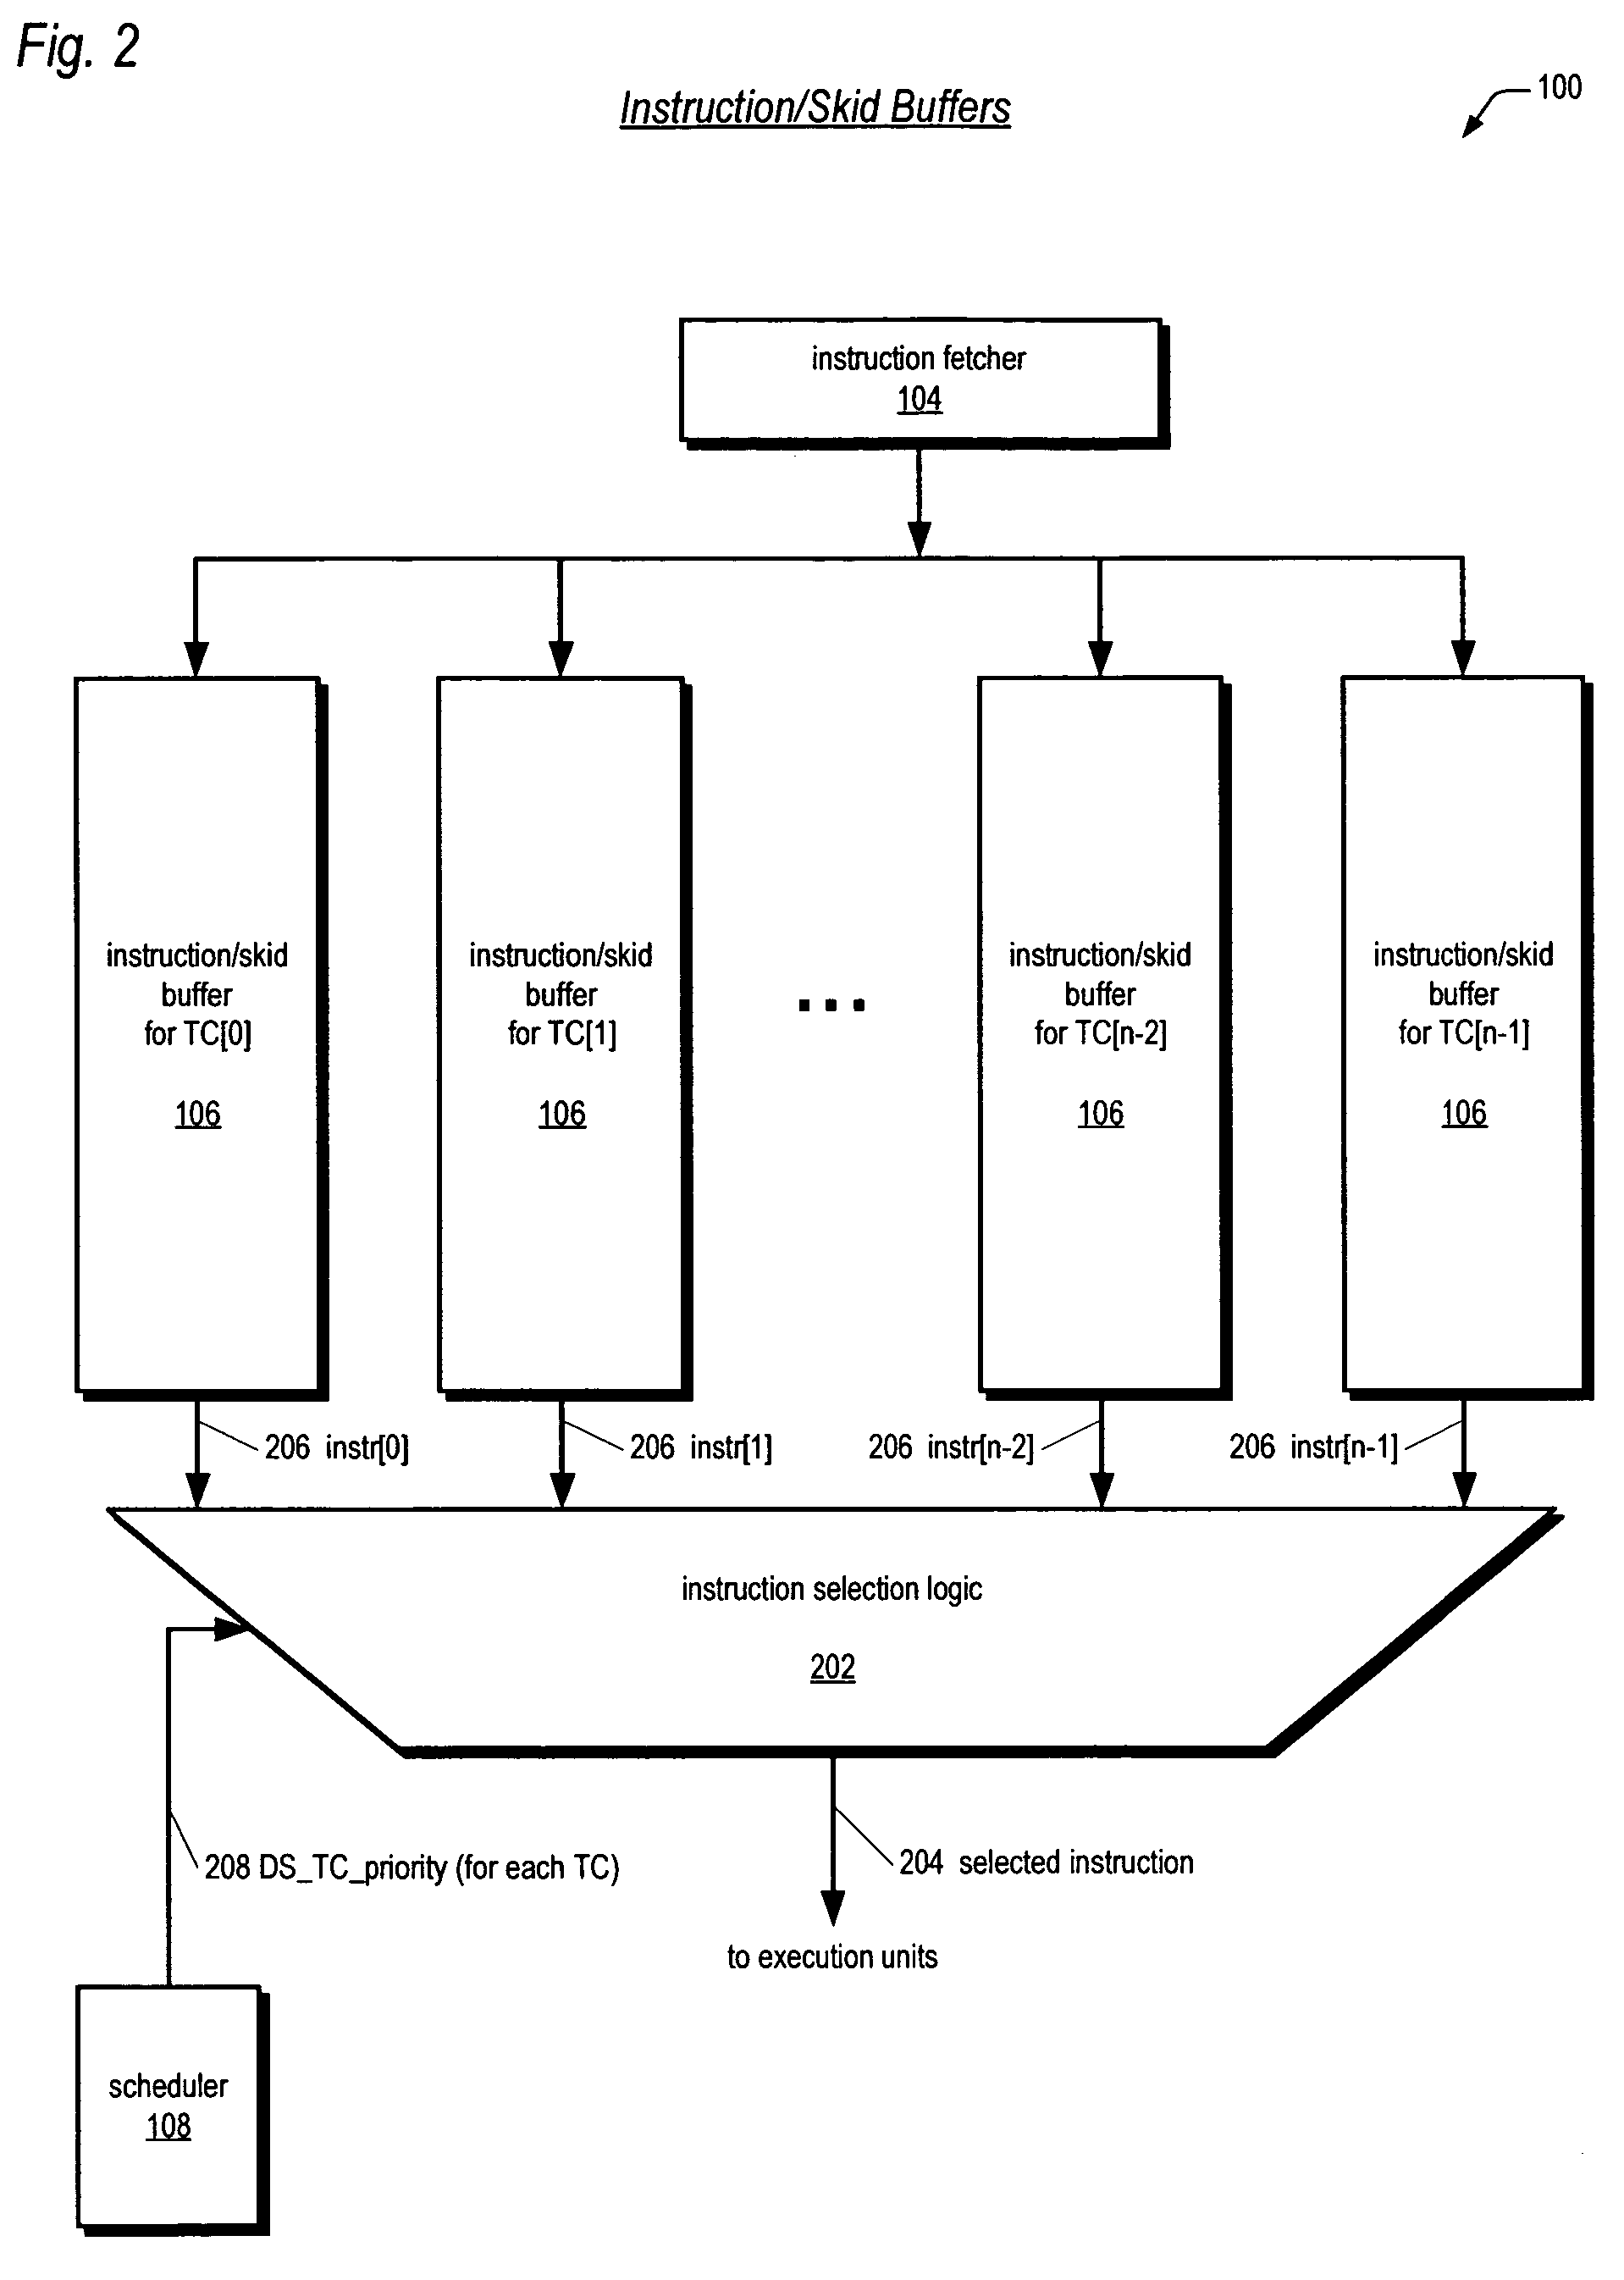 Instruction dispatch scheduler employing round-robin apparatus supporting multiple thread priorities for use in multithreading microprocessor